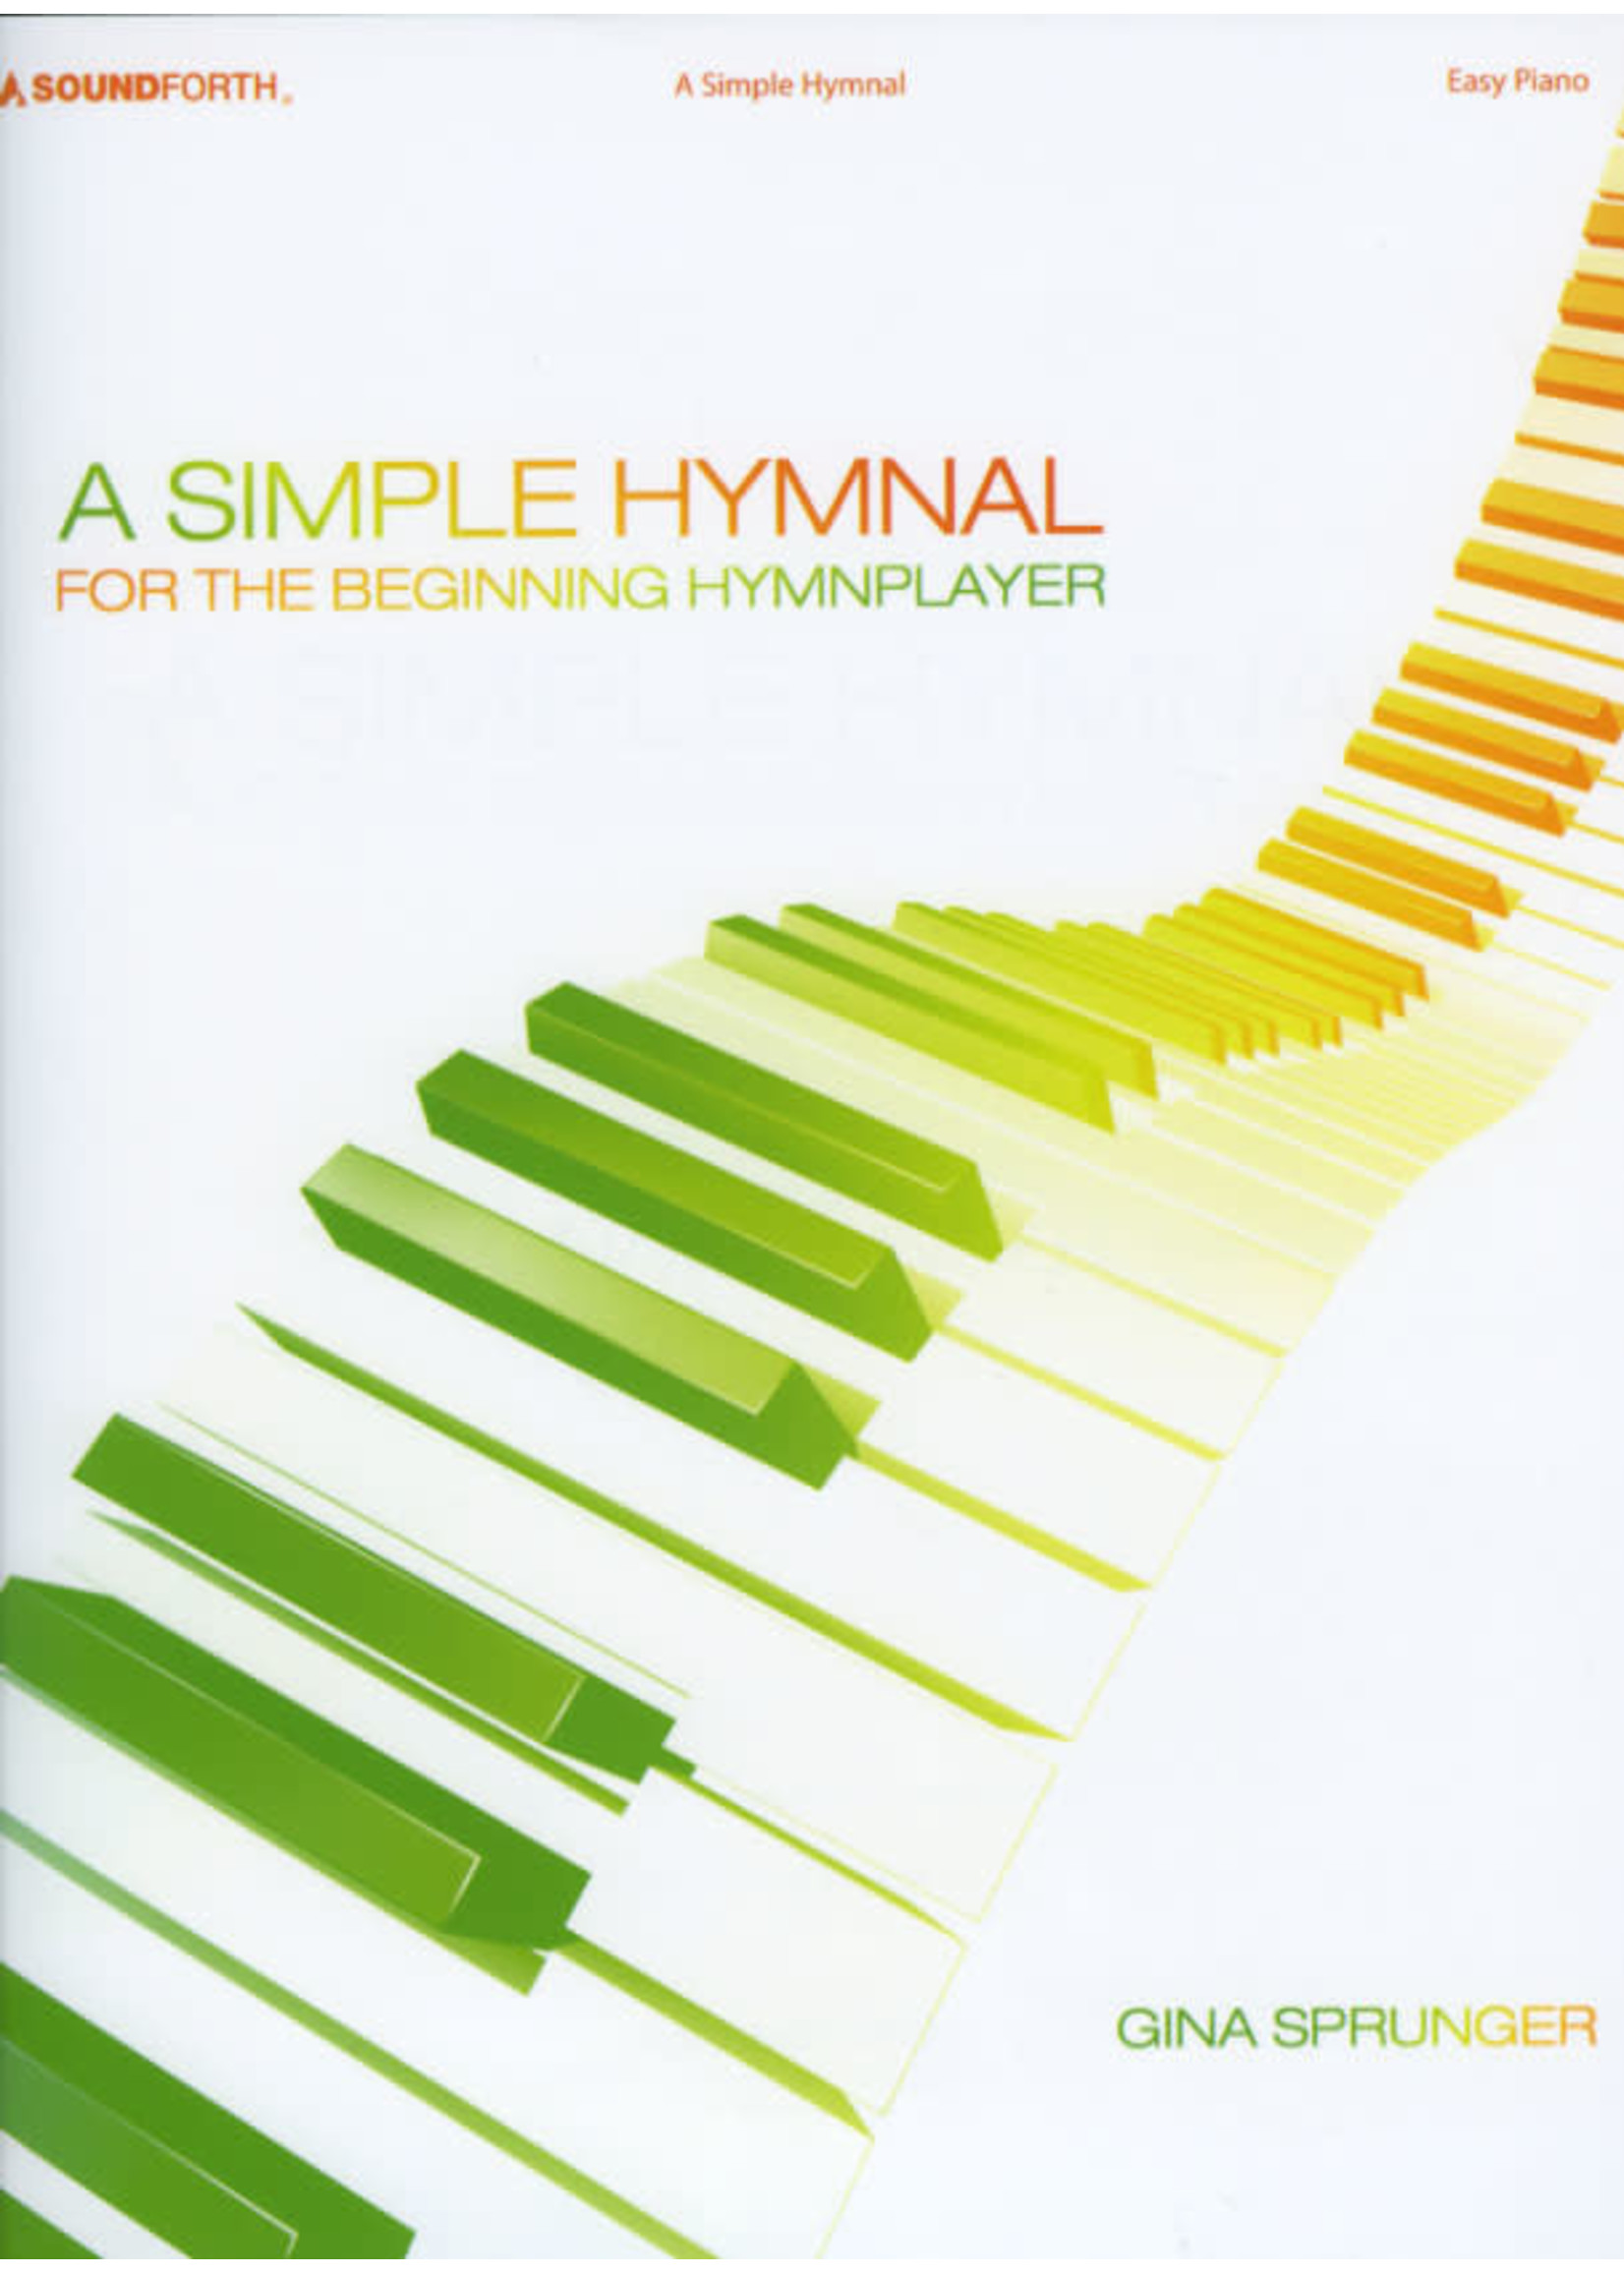 A Simple Hymnal (Sprunger)